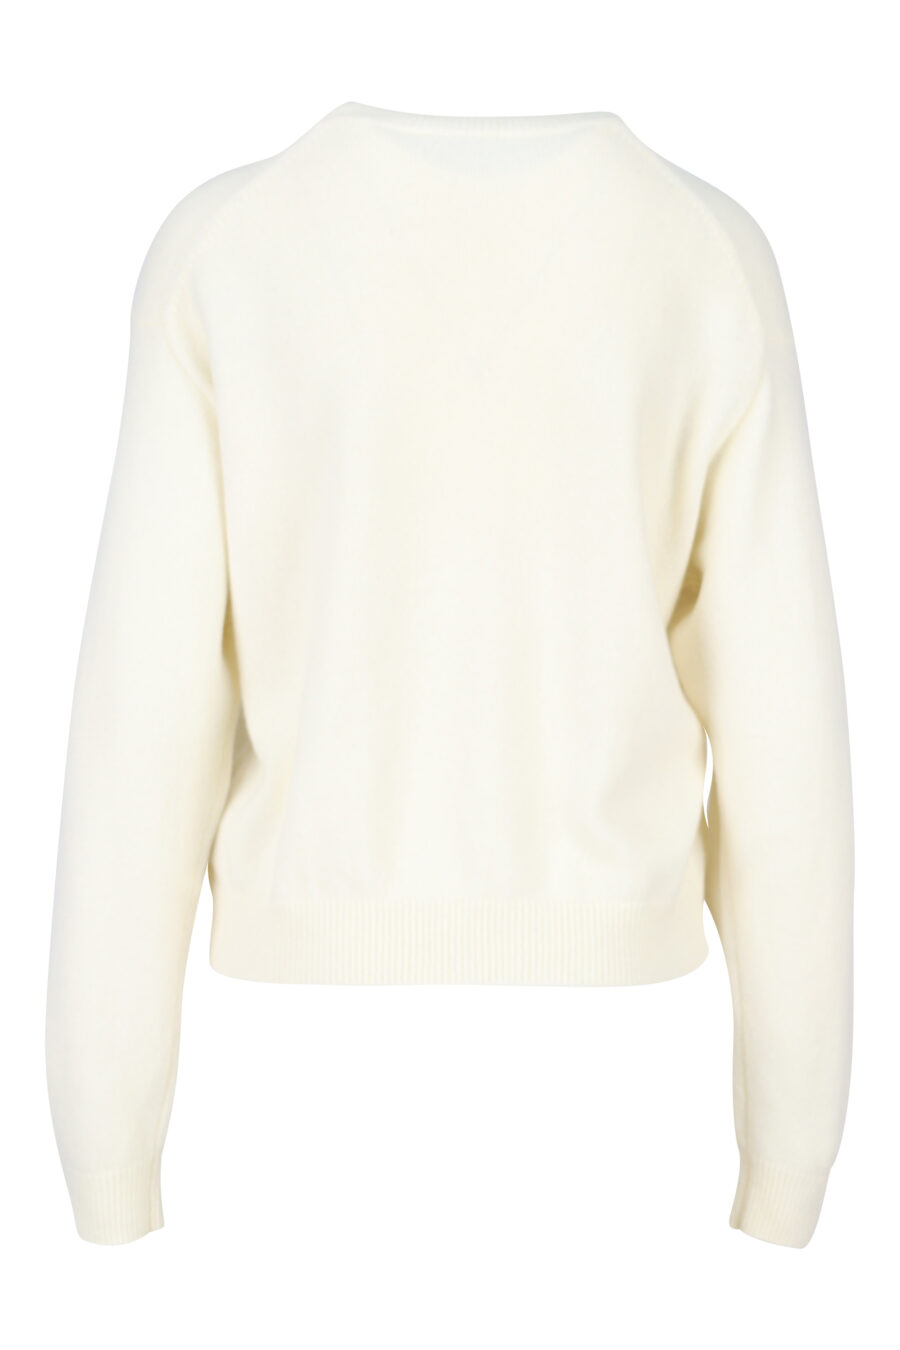 White pullover with "boke flower" maxilogue - 3612230530171 1